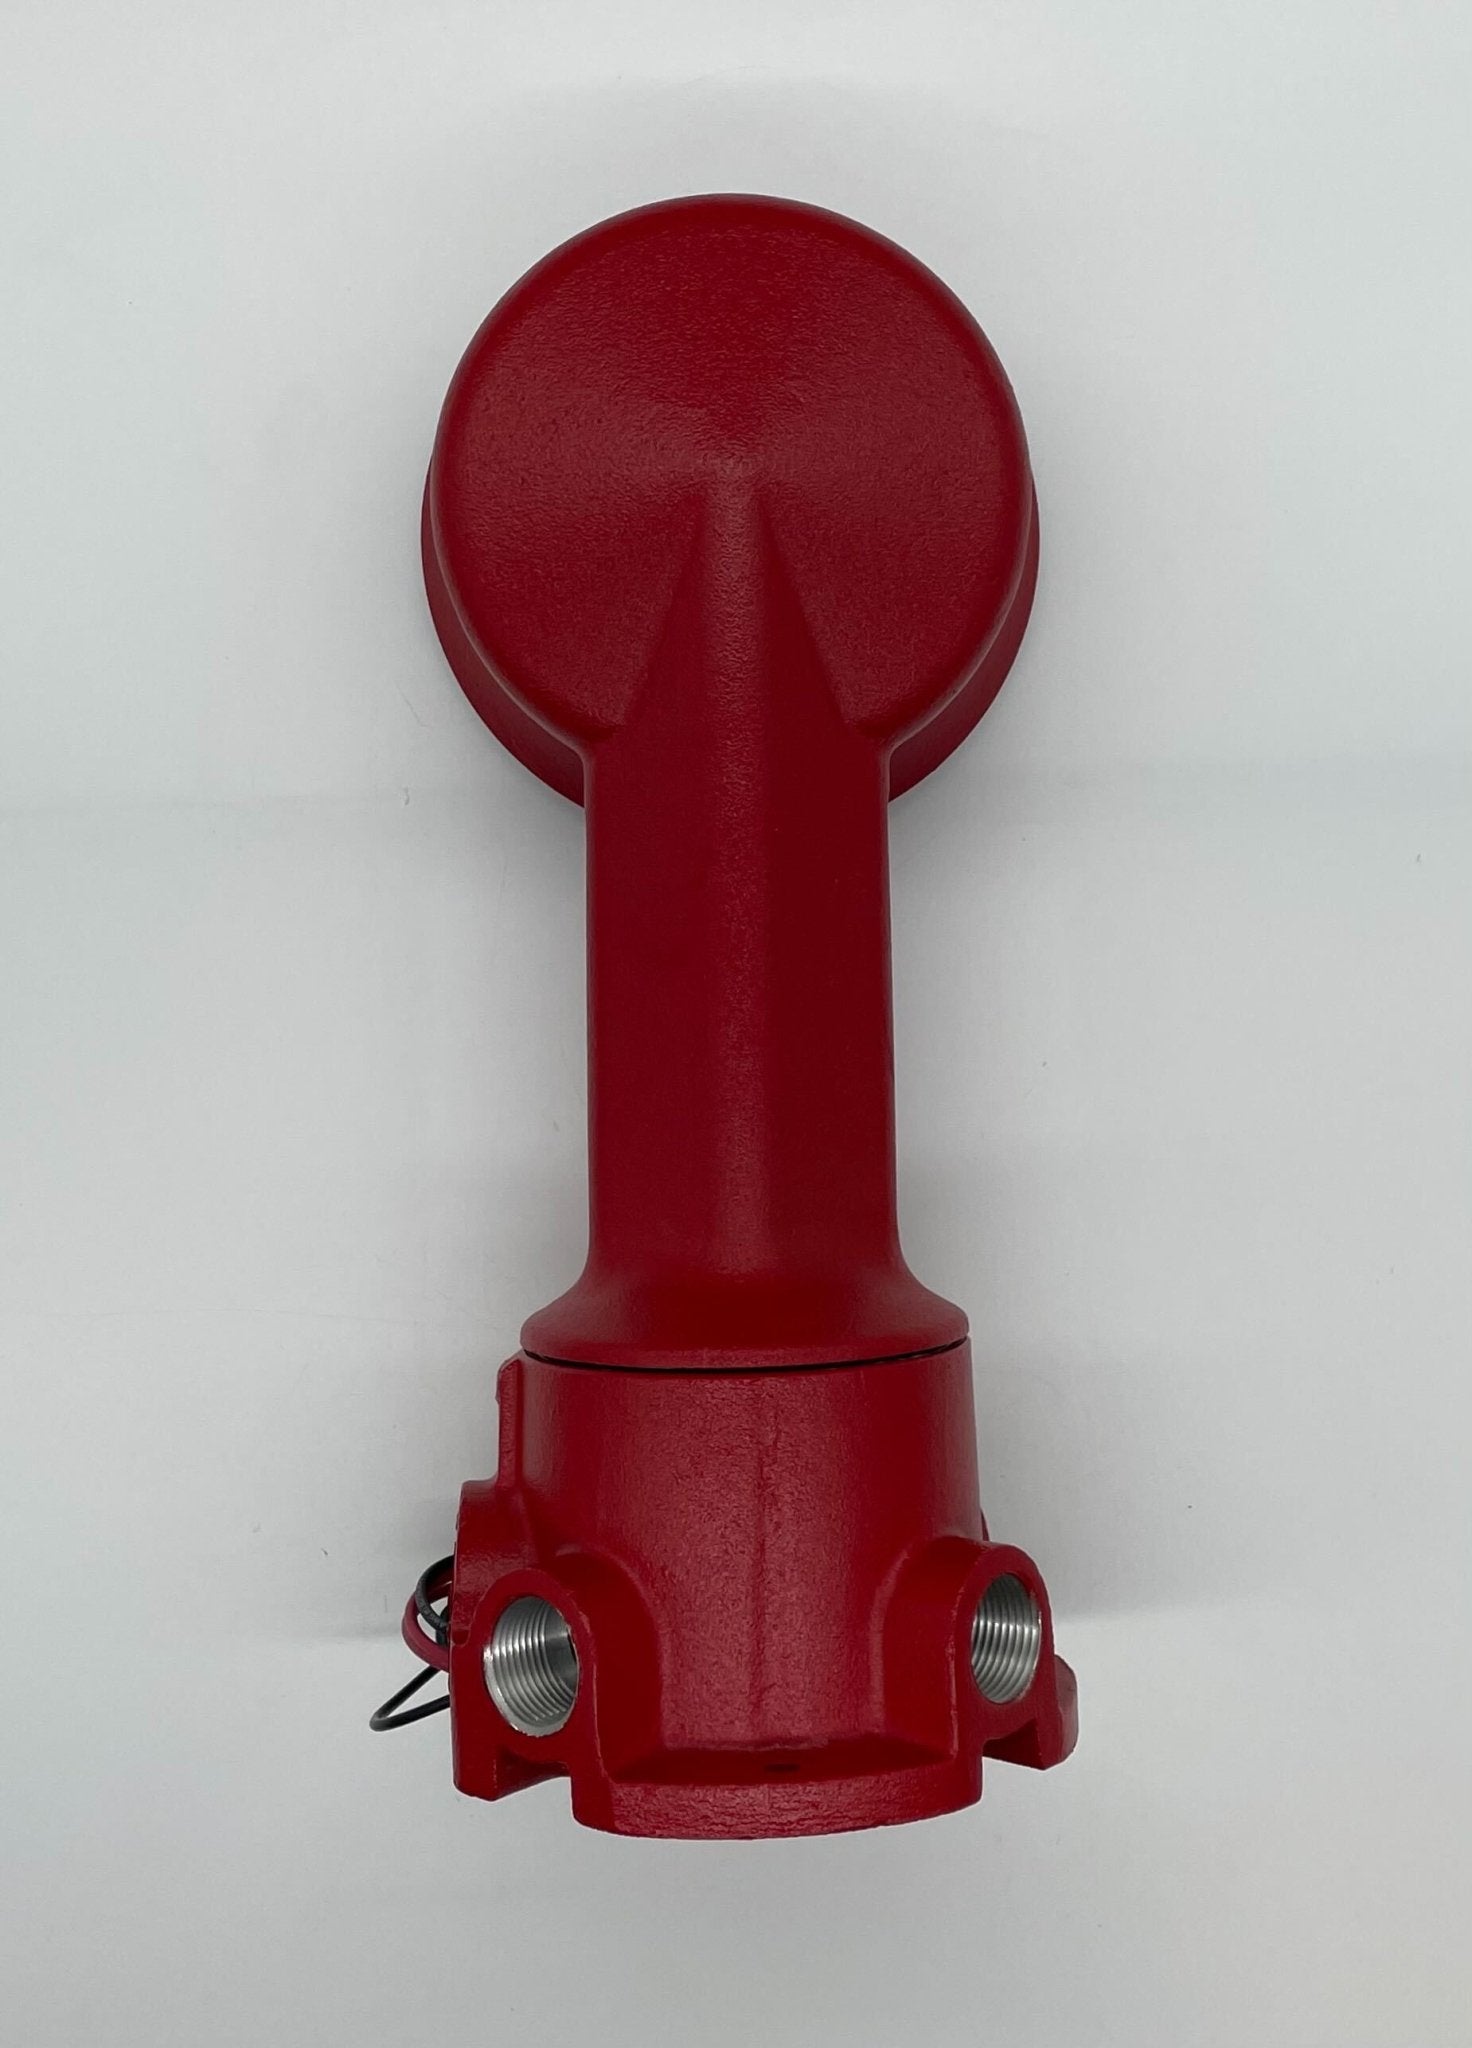 Potter WMXC-4R-SB - The Fire Alarm Supplier